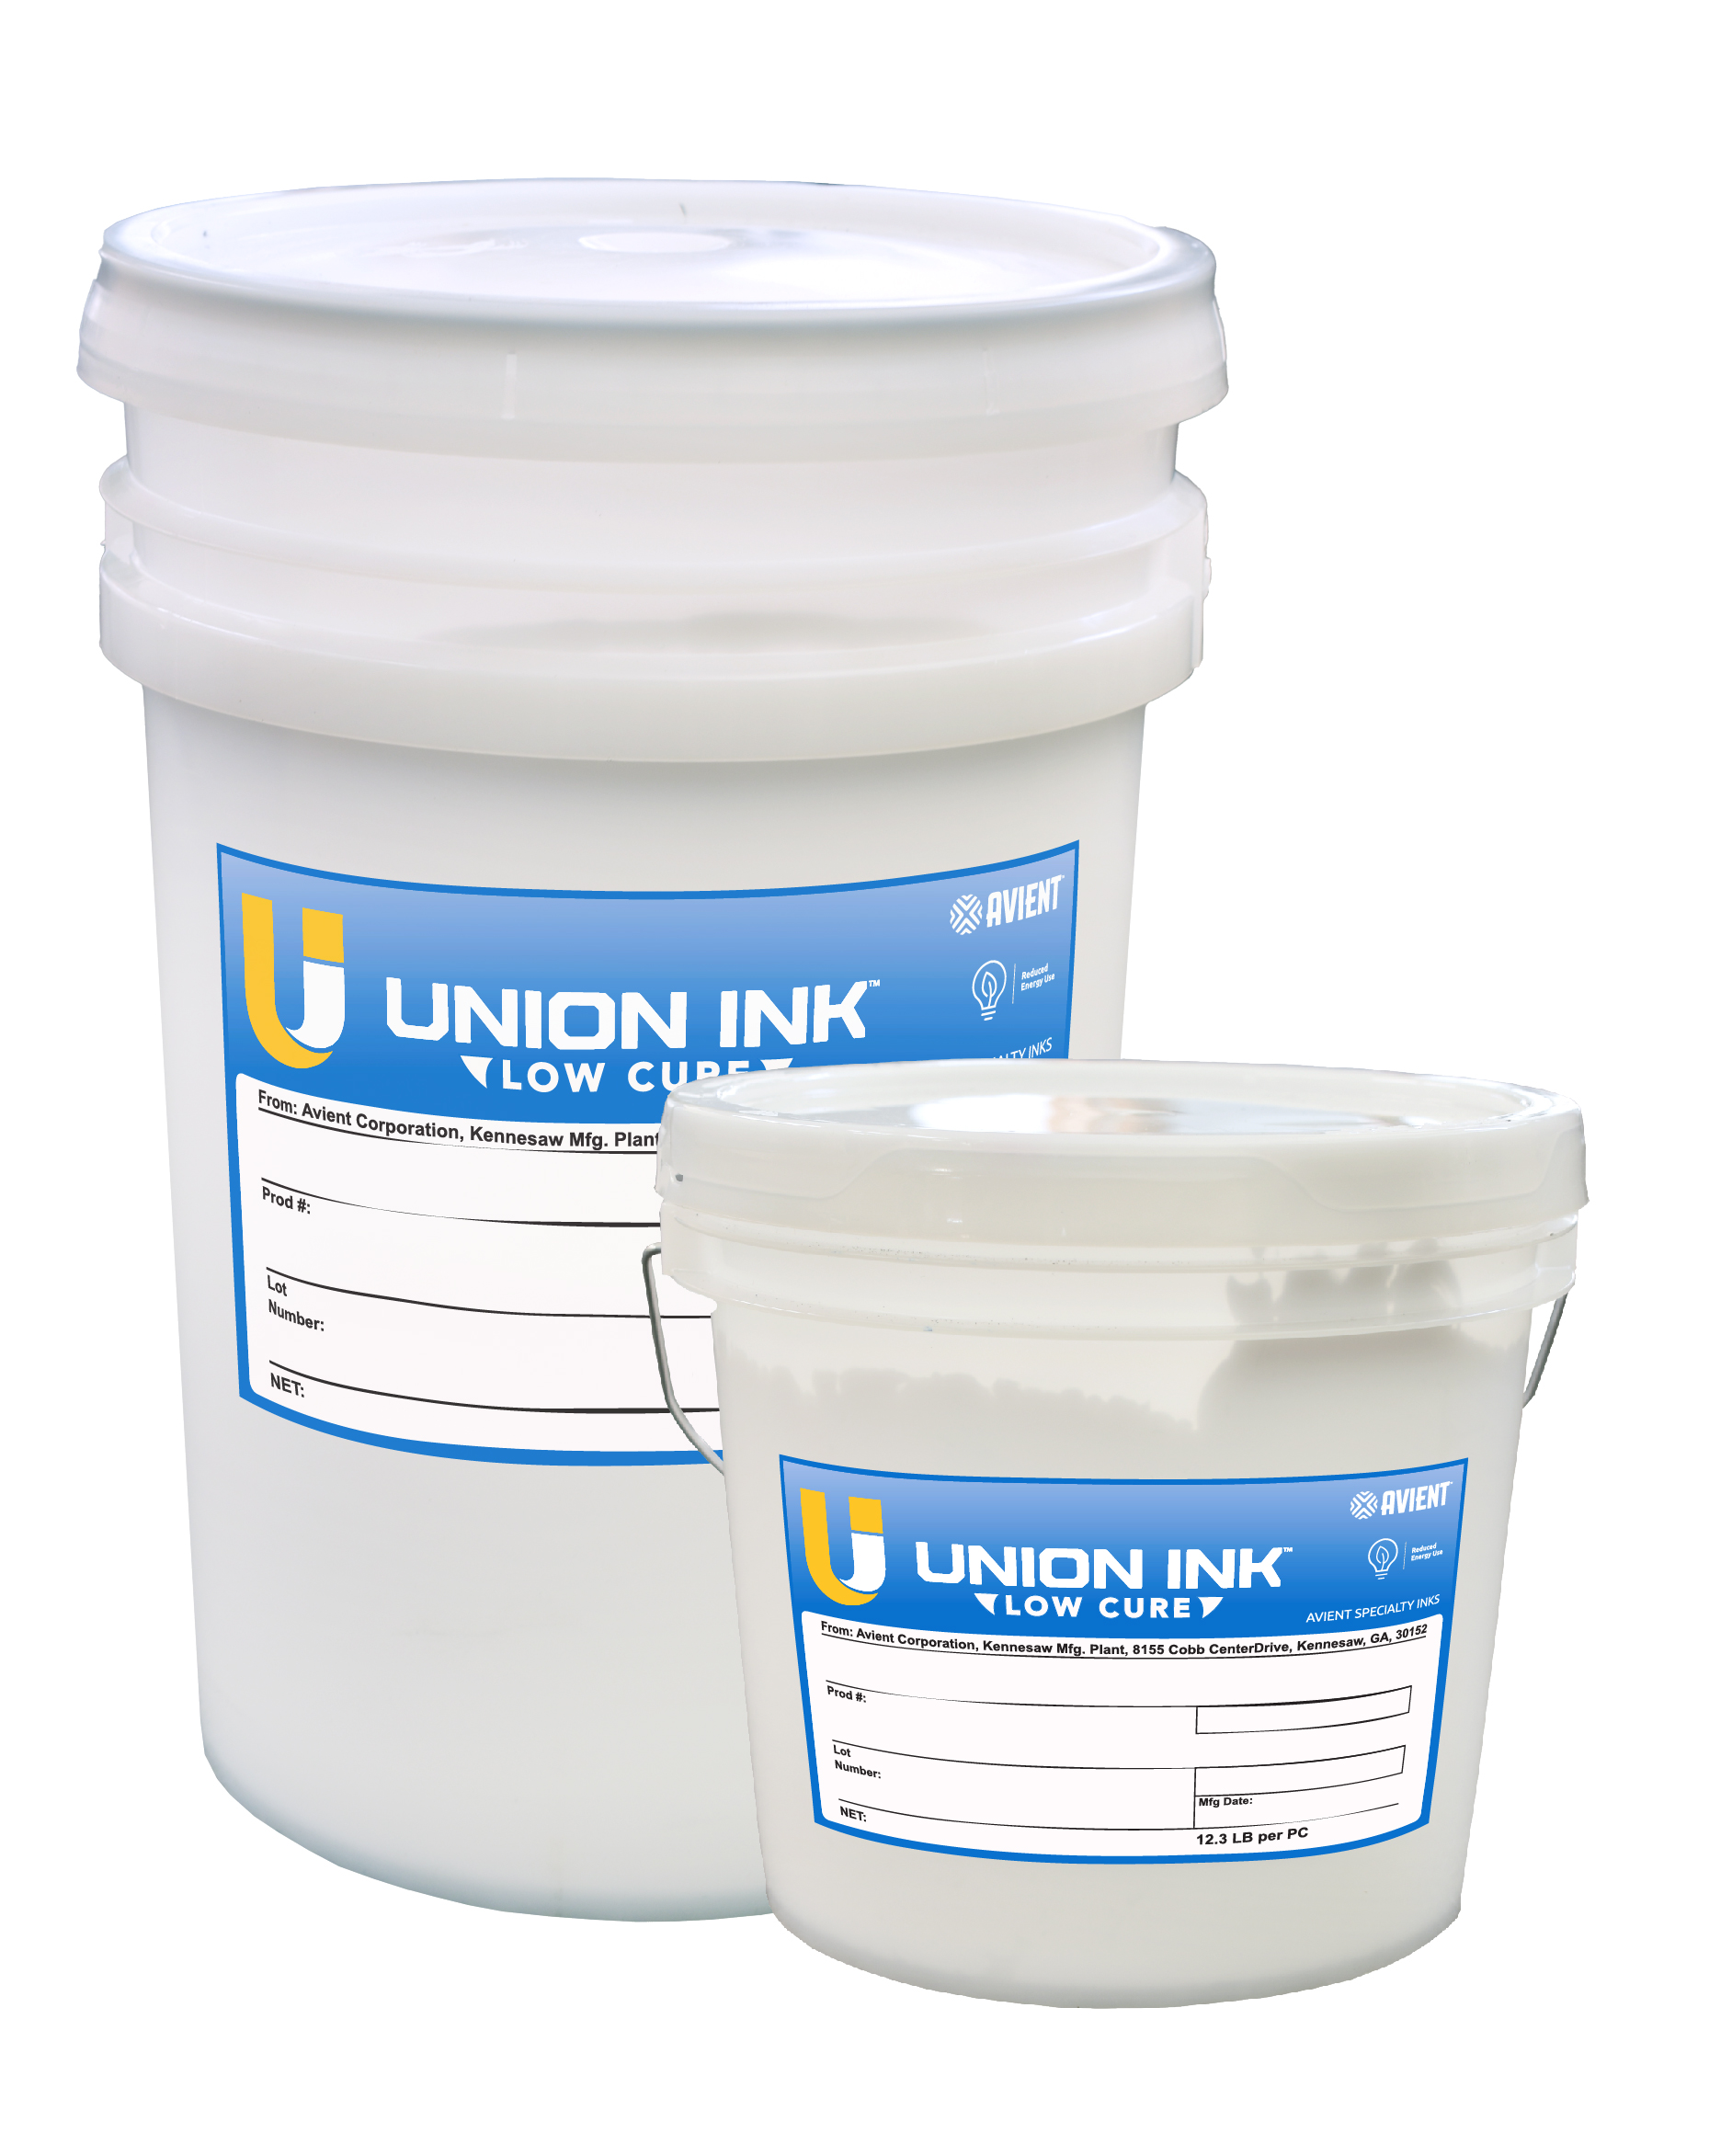 <p>Union™ Omni Low Cure range is a low cure ink system with a recommended cure temperature of 270°F/132°C. Products include a variety of premixed athletic colors utilizing non-migrating pigments, as well as a bleed blocking barrier gray and barrier black. </p>